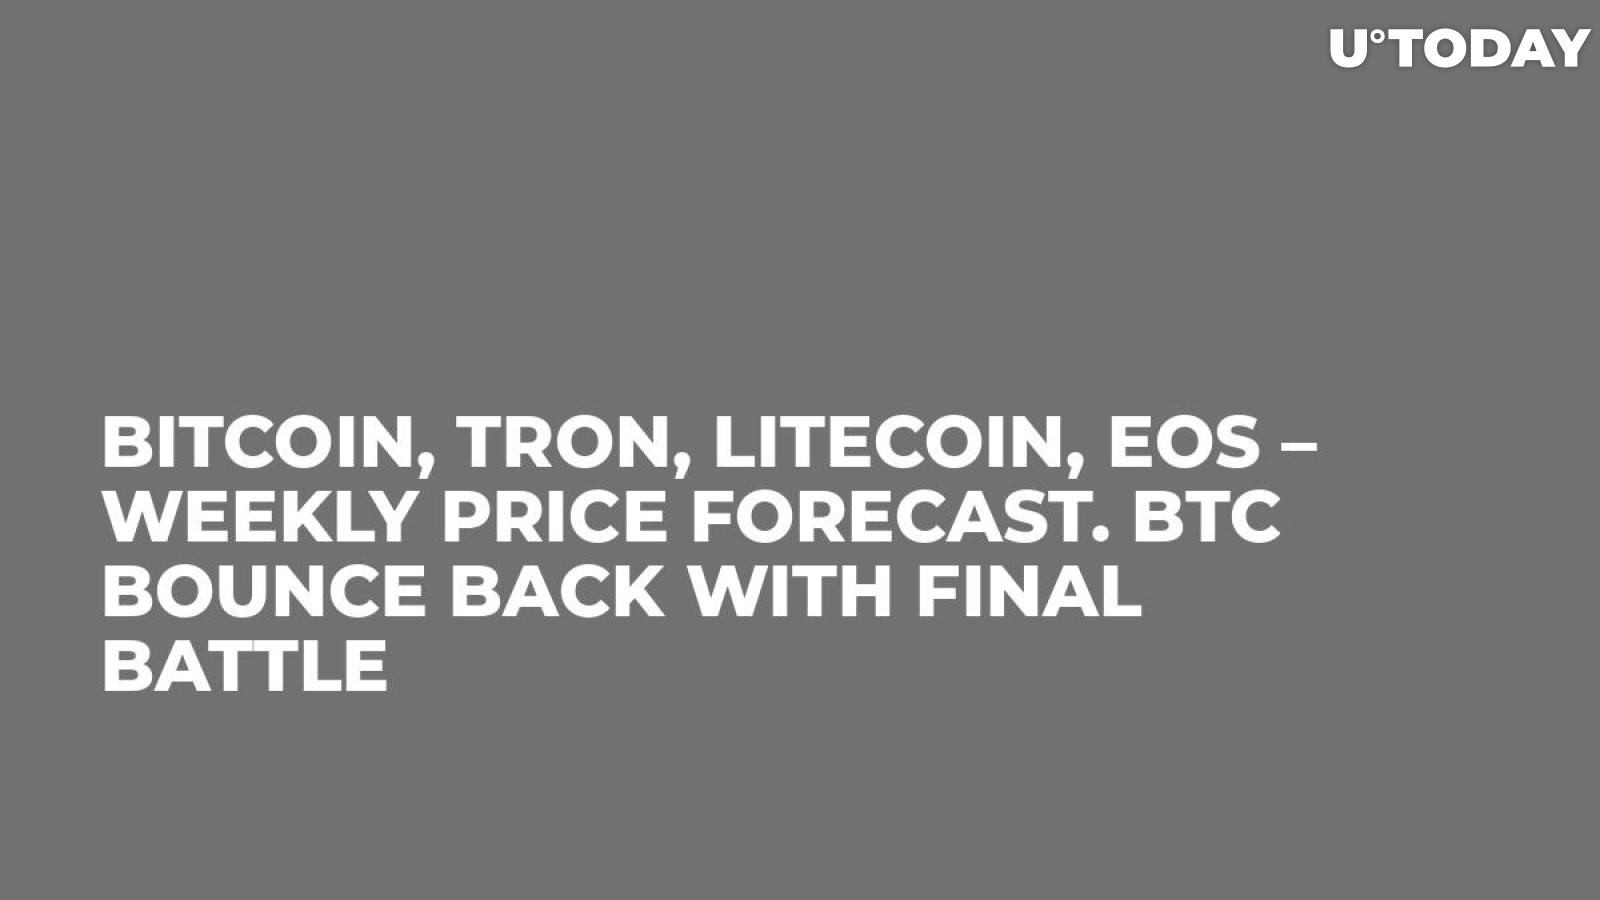 Bitcoin, Tron, Litecoin, EOS – Weekly Price Forecast. BTC Bounce Back with Final Battle